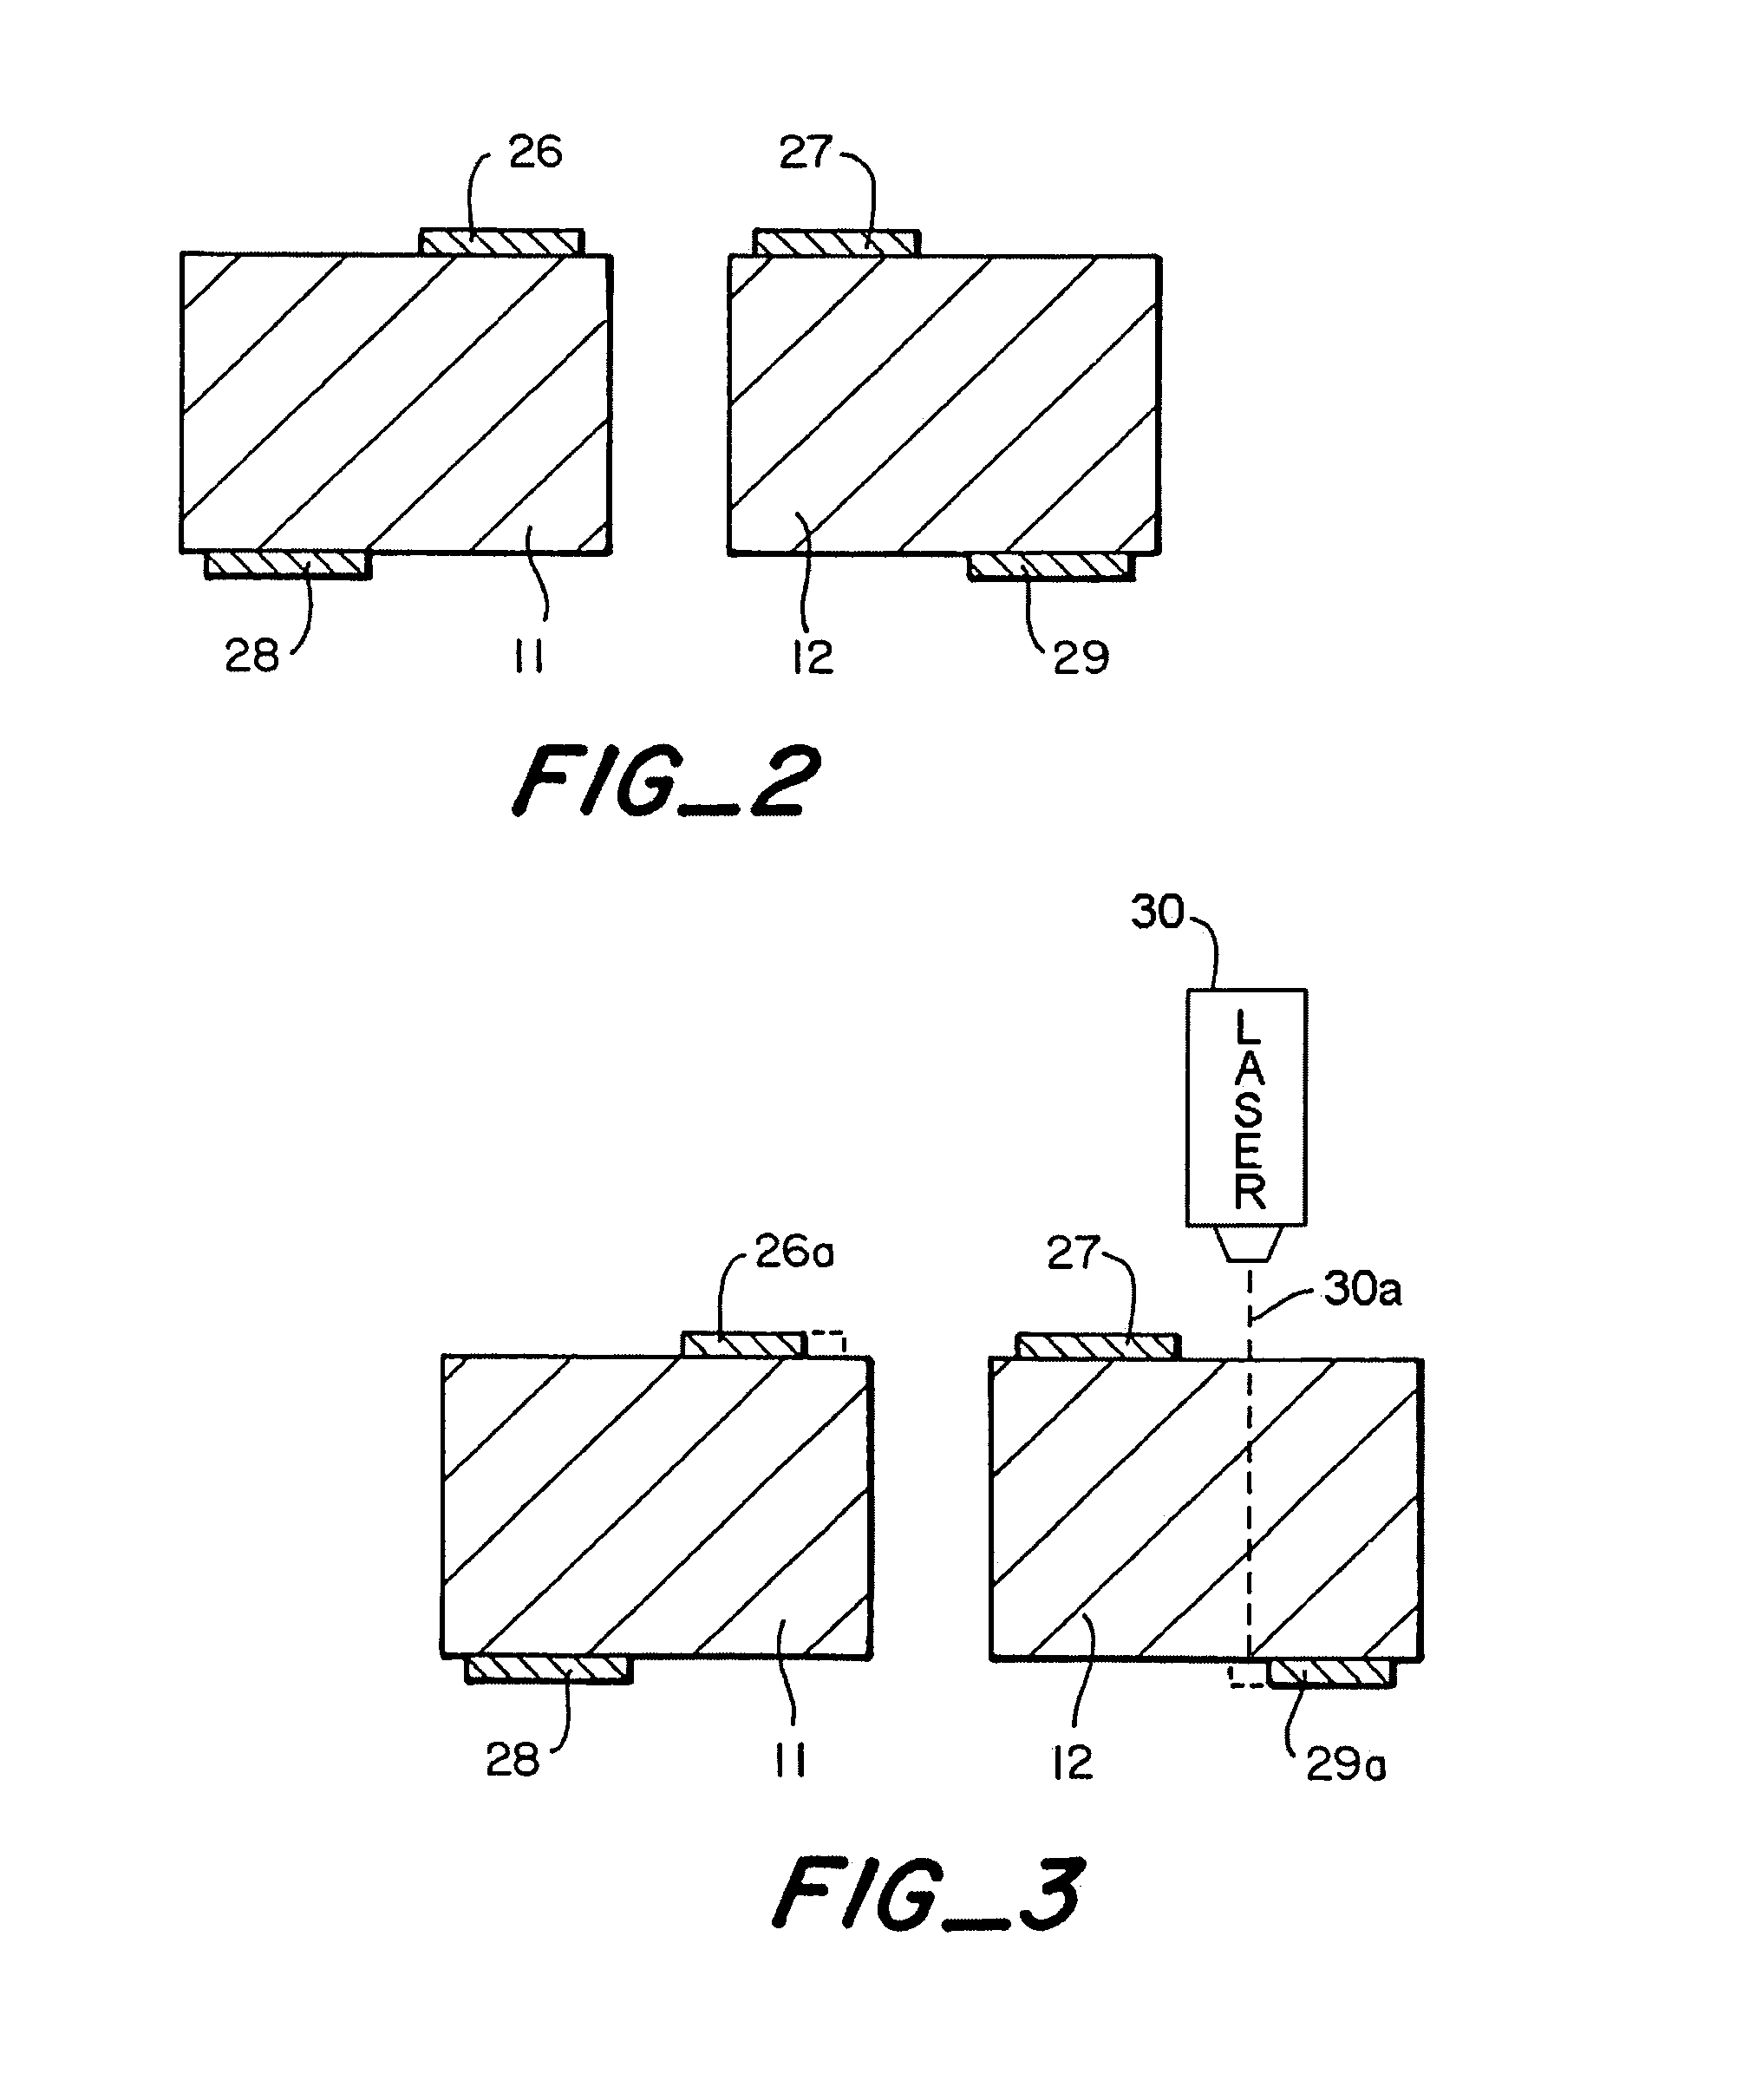 Method of manufacturing a tuning fork with reduced quadrature errror and symmetrical mass balancing